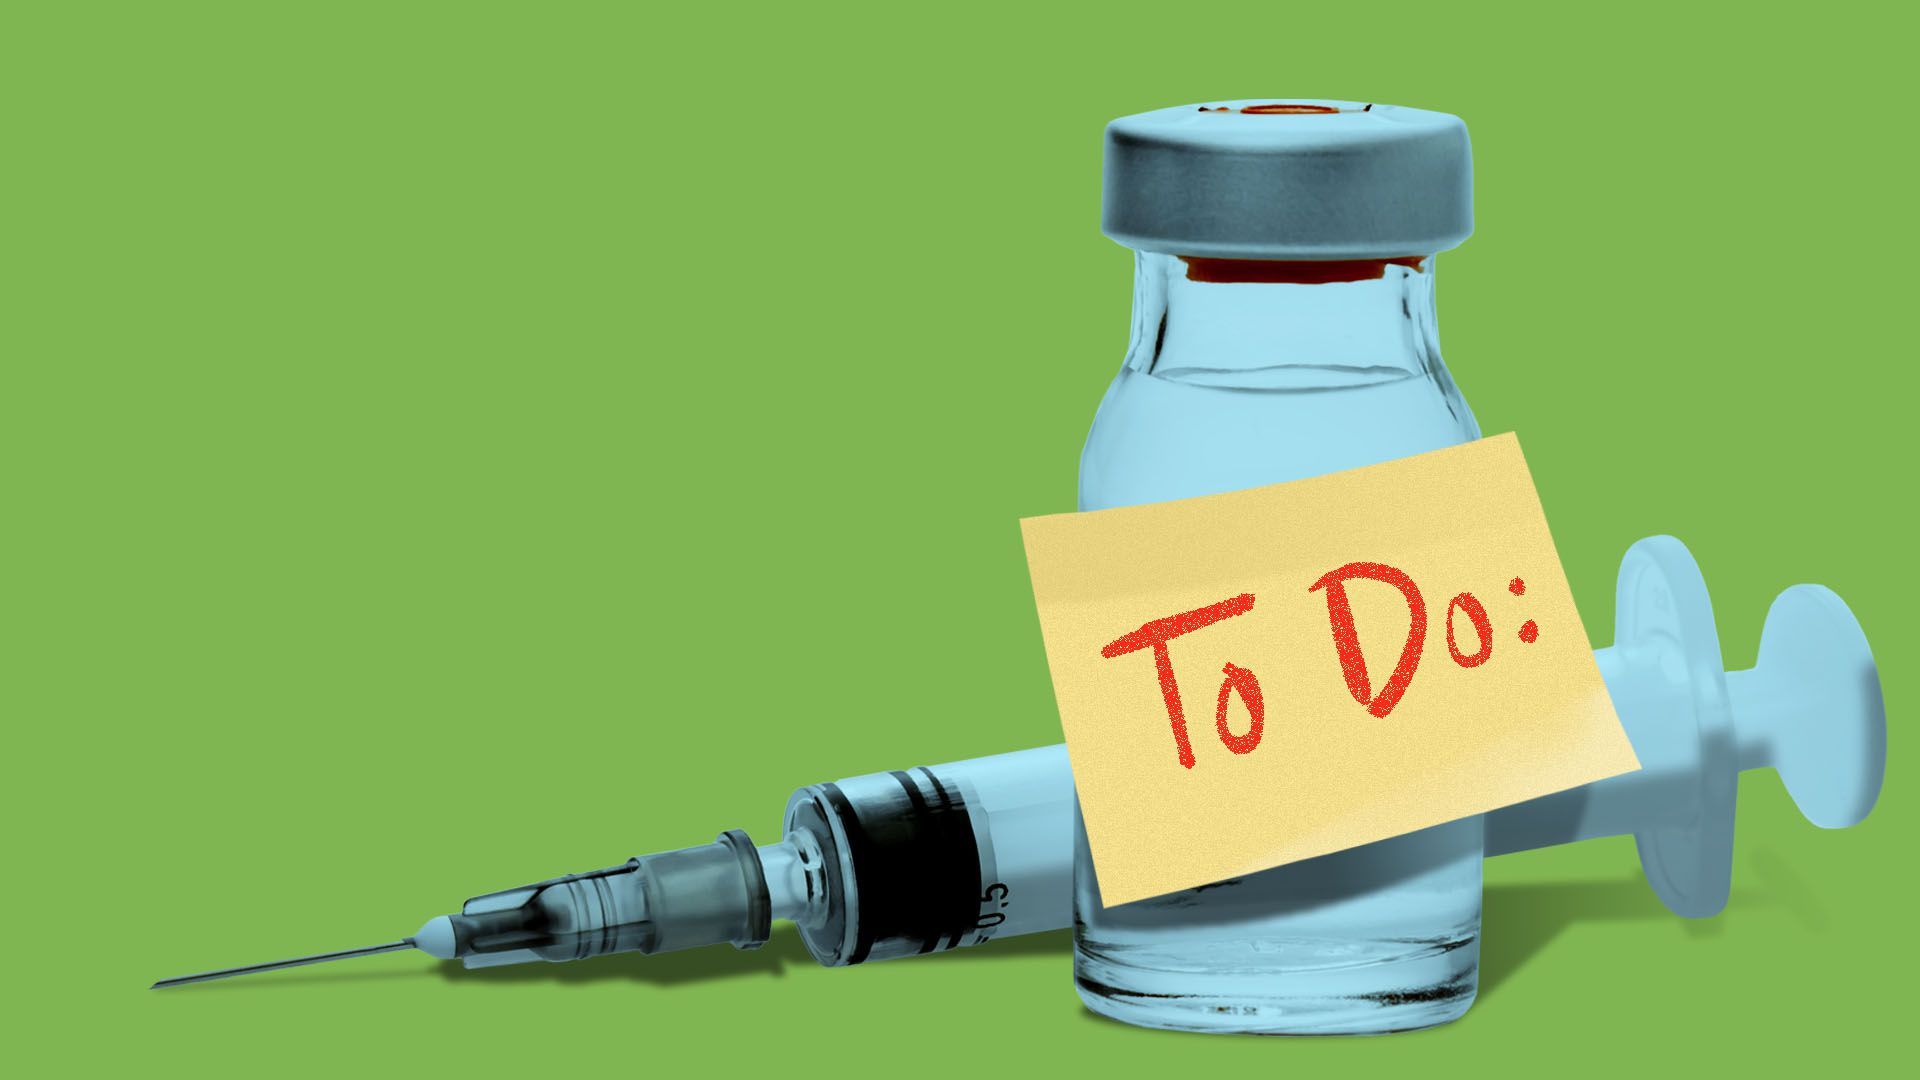 Illustration of a syringe and glass medicine bottle with a post-it note attached that says "to do"